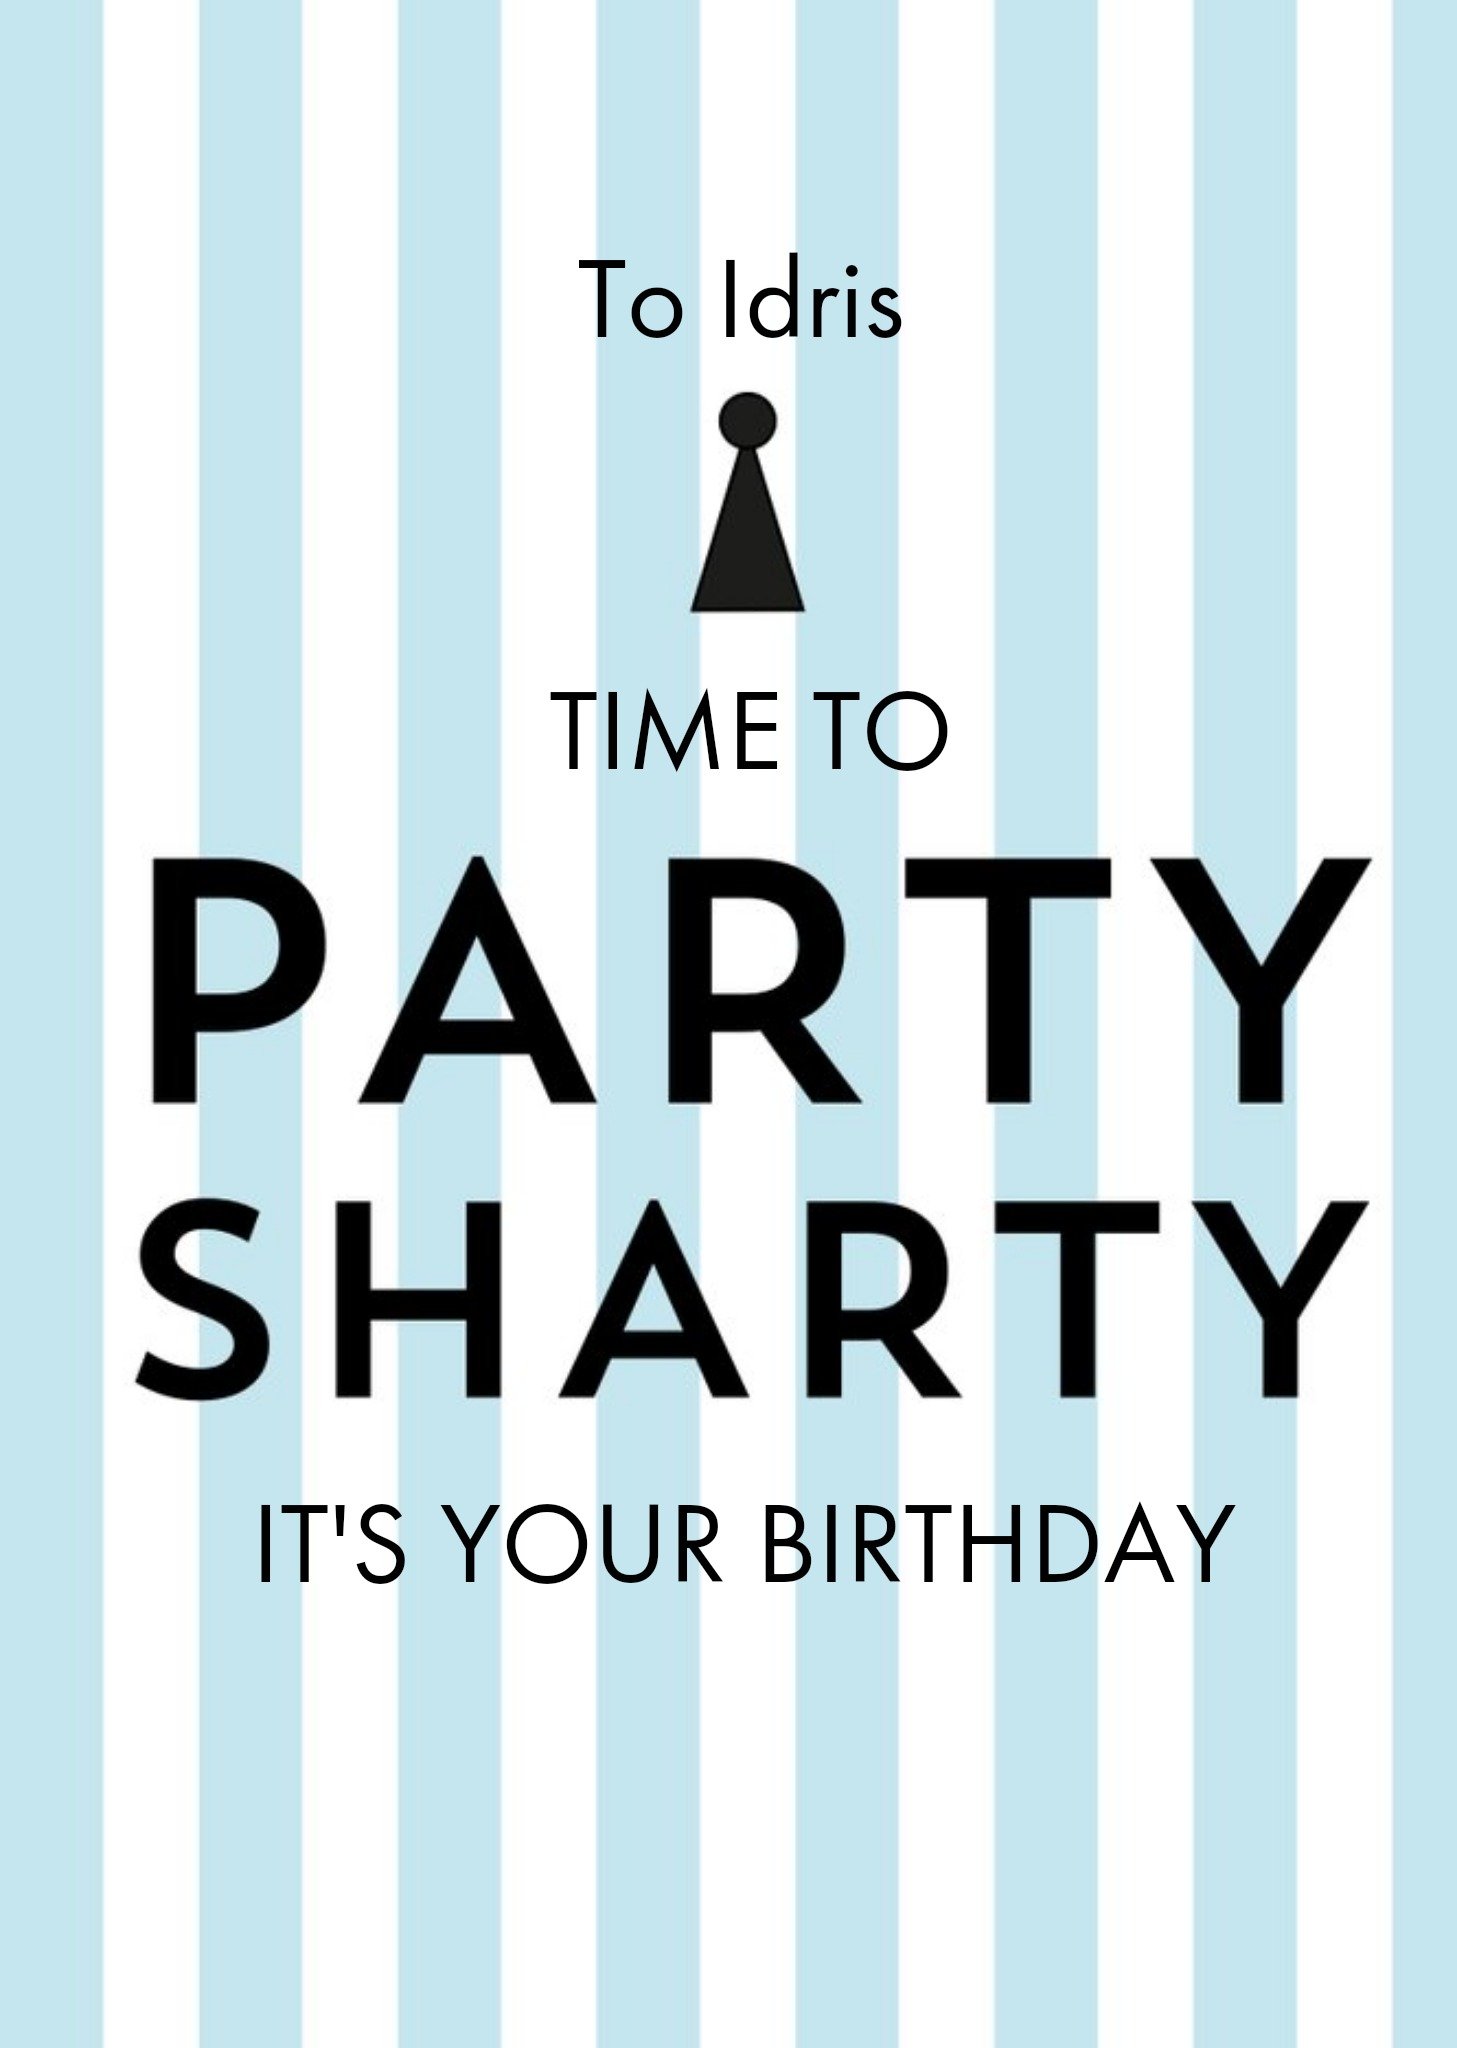 Eastern Print Studio Time To Party Sharty It's Your Birthday Islamic Birthday Card, Large